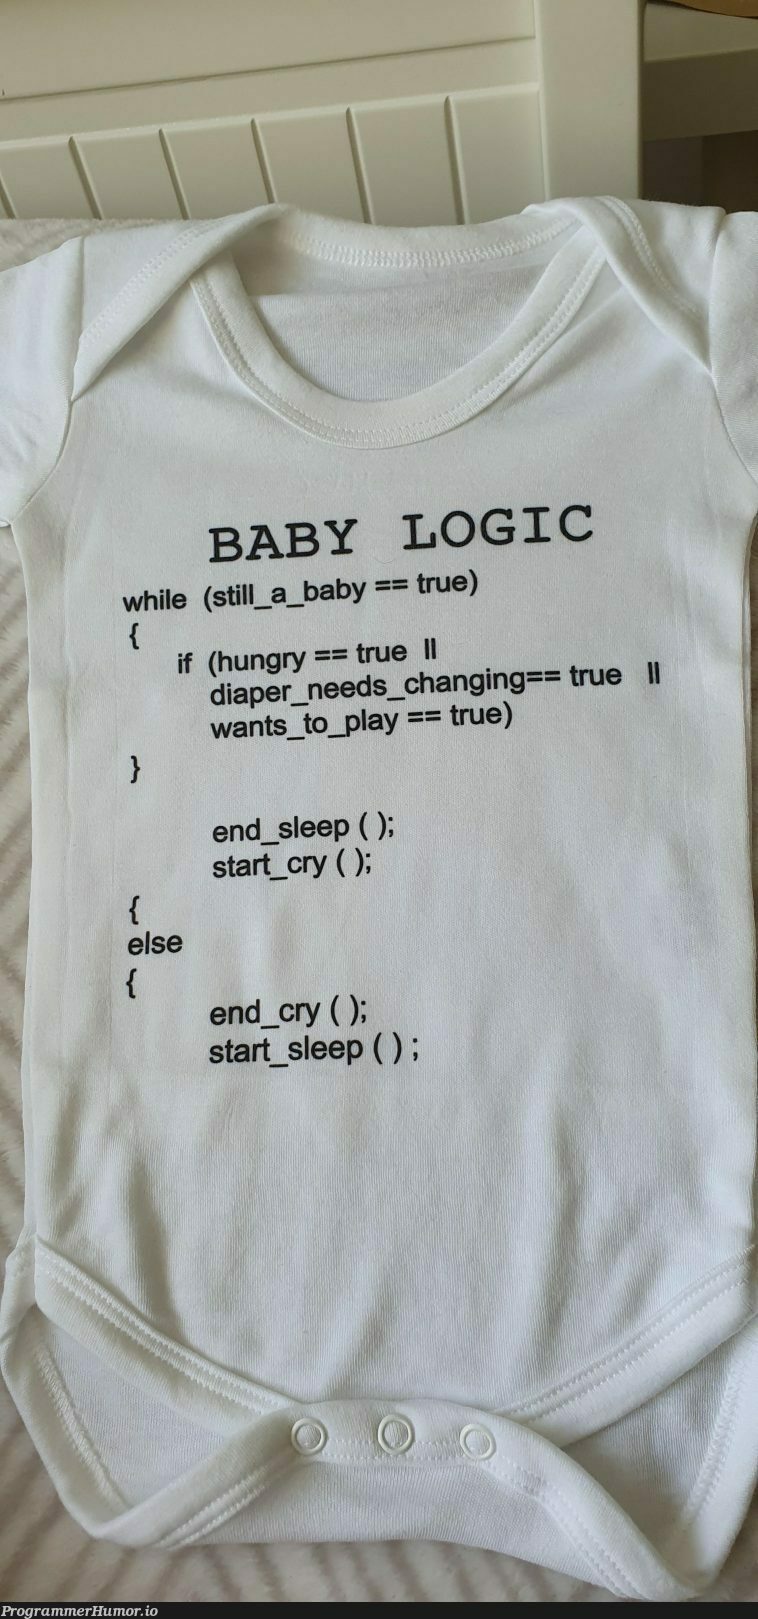 Given this as a gift. Friends don't understand why I refuse to let the baby wear this travesty | ProgrammerHumor.io